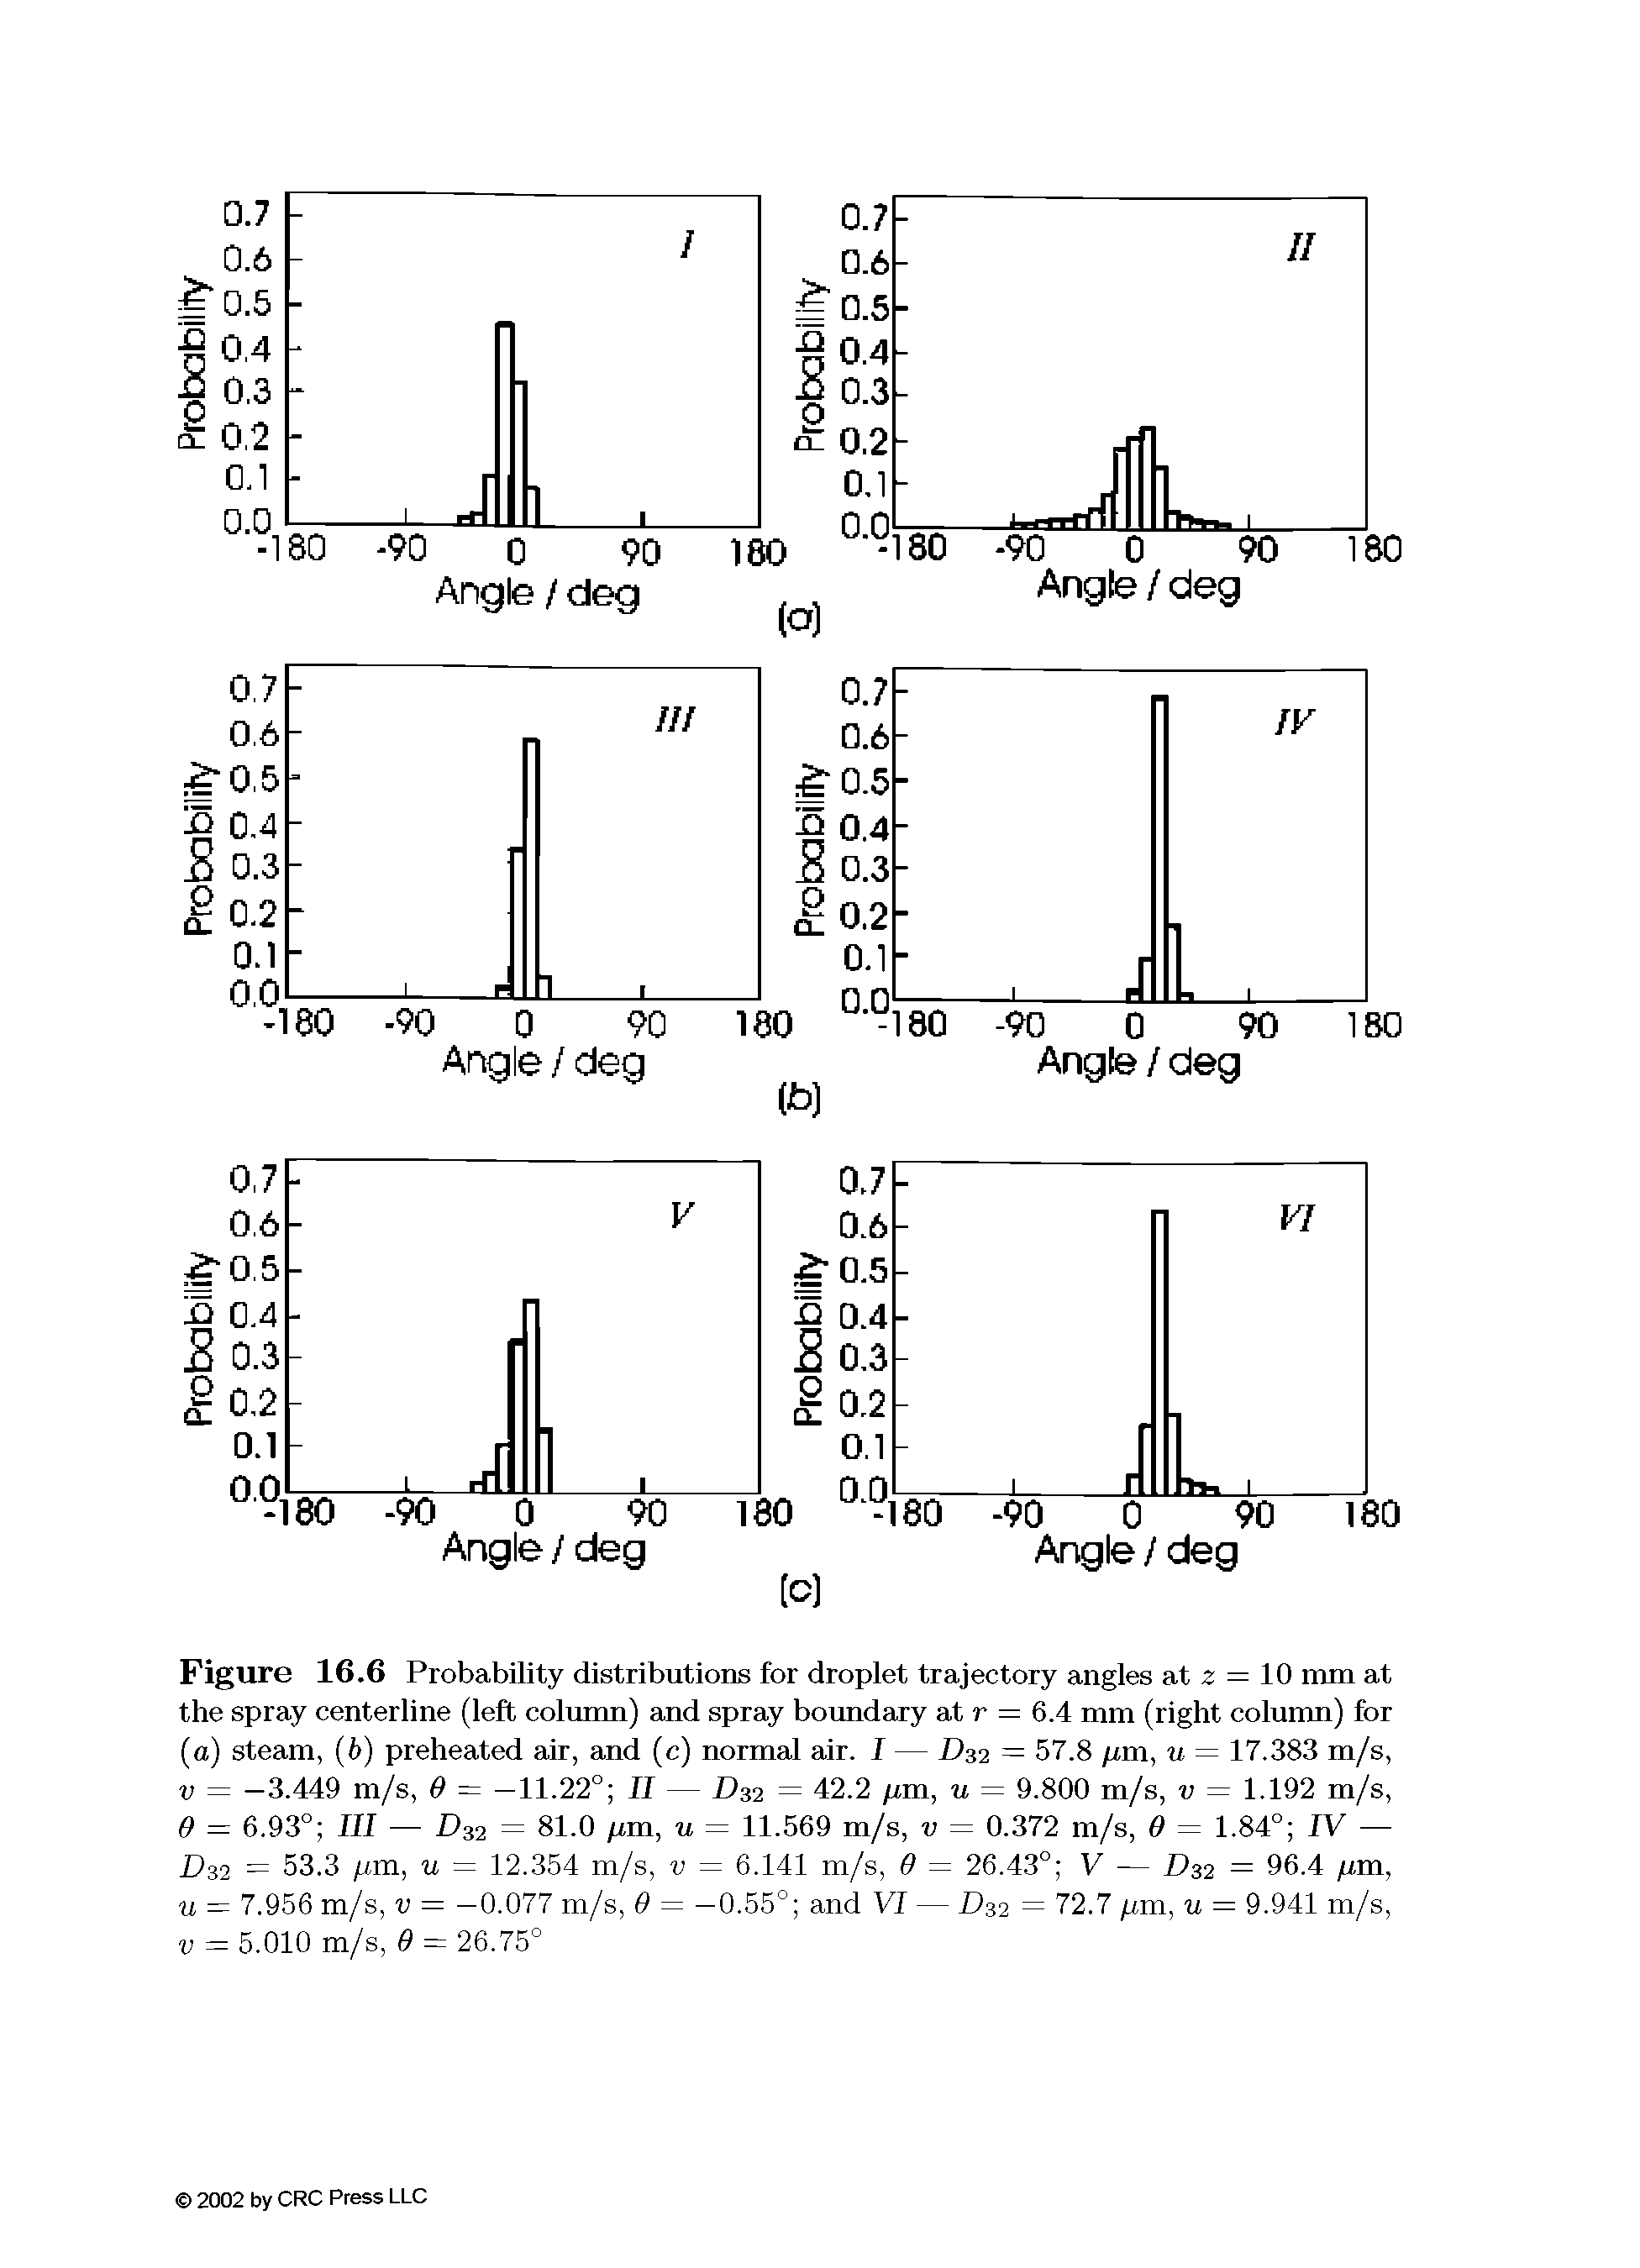 Figure 16.6 Probability distributions for droplet trajectory angles at z = 10 mm at the spray centerline (left column) and spray boundary at r = 6.4 mm (right column) for (a) steam, (6) preheated air, and (c) normal air. I — D32 = 57.8 /rm, u = 17.383 m/s,...